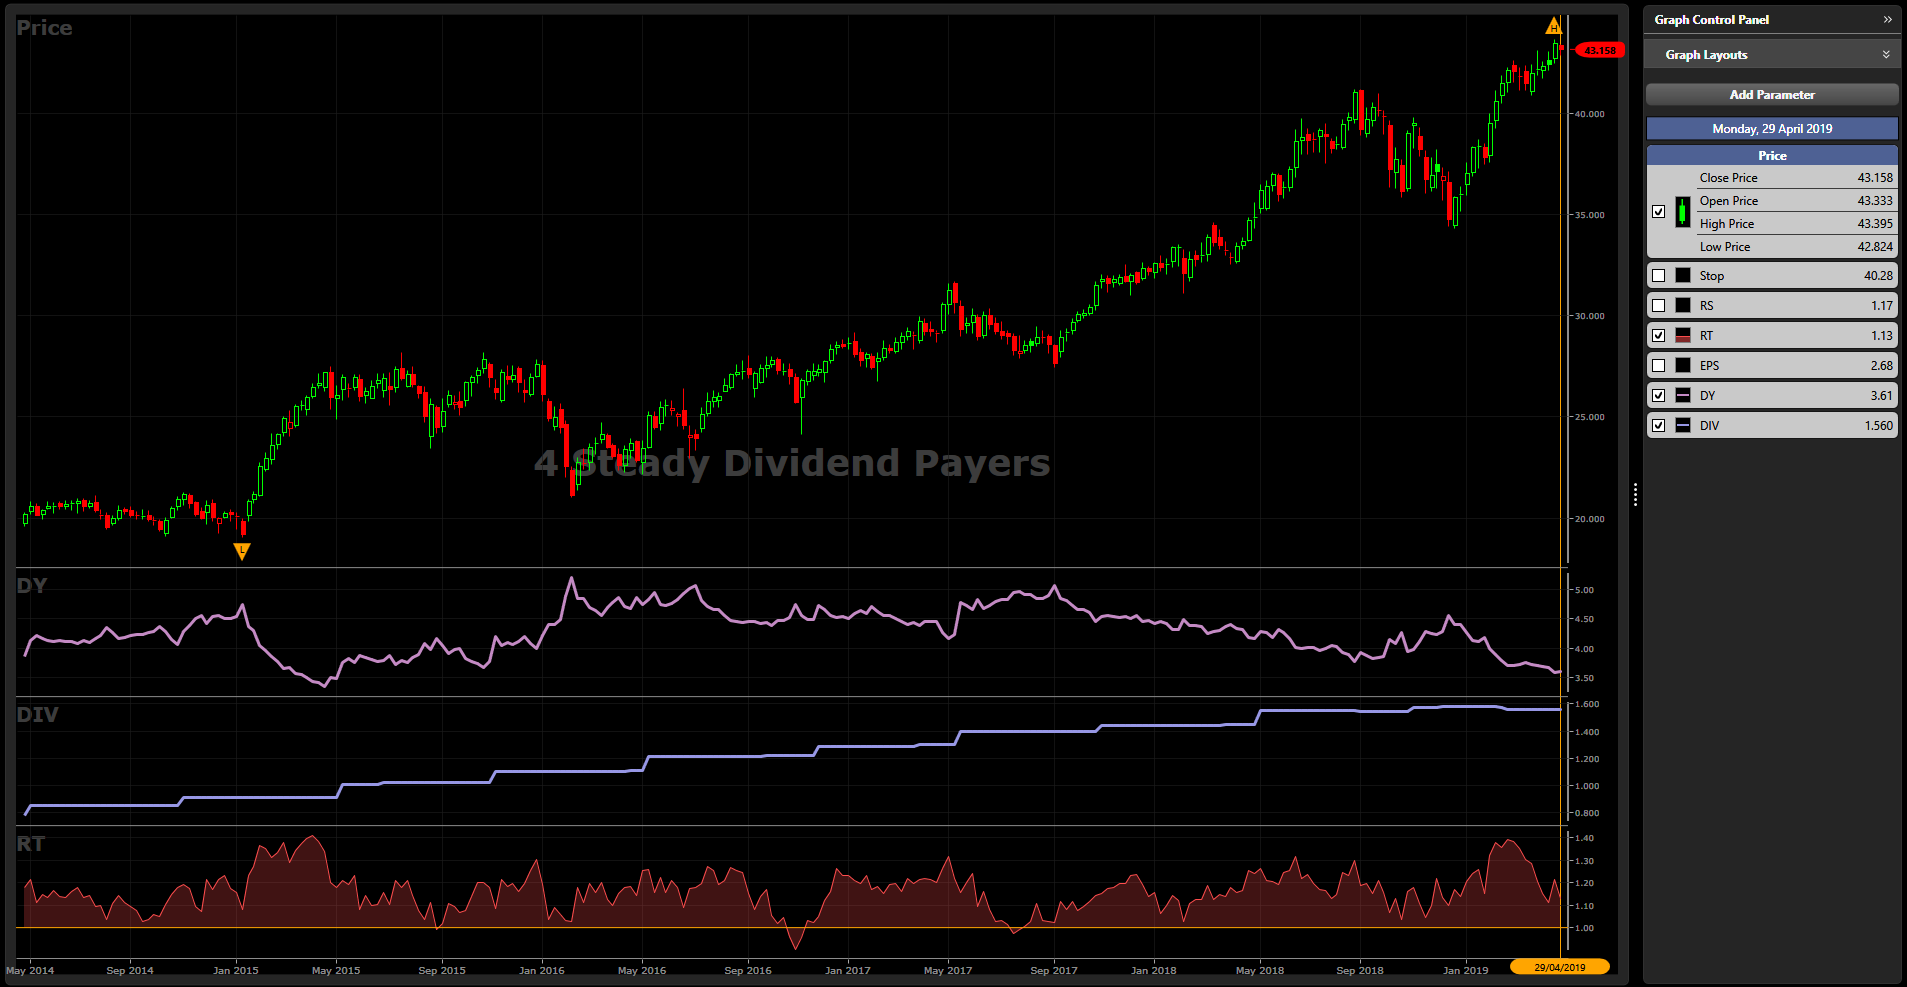 Top 4 Dividend Payers